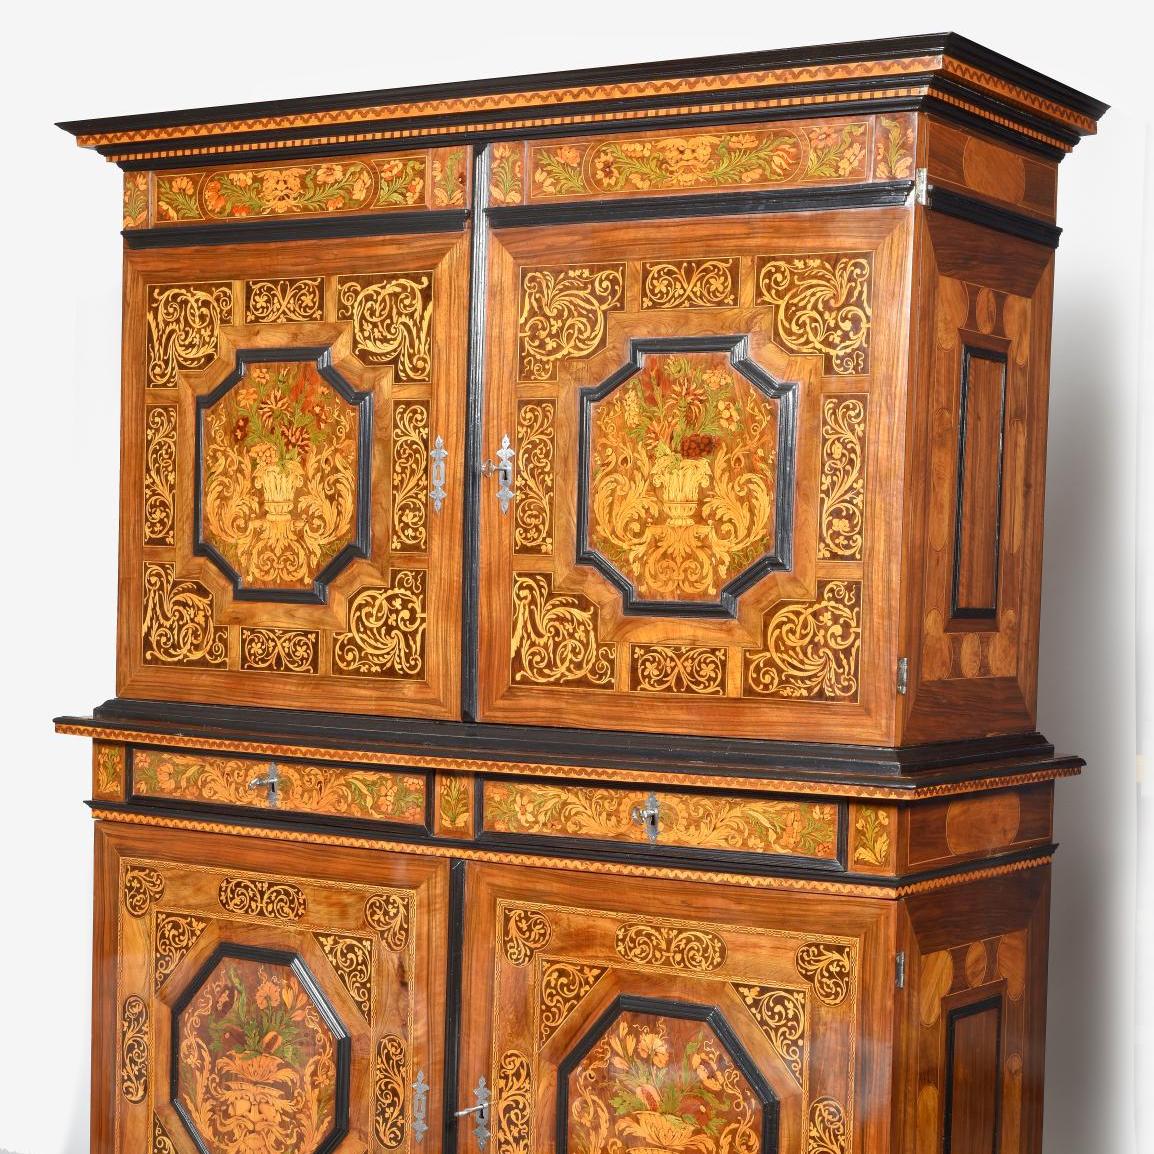 A Thomas Hache Cabinet Makes its First Appearance - Pre-sale